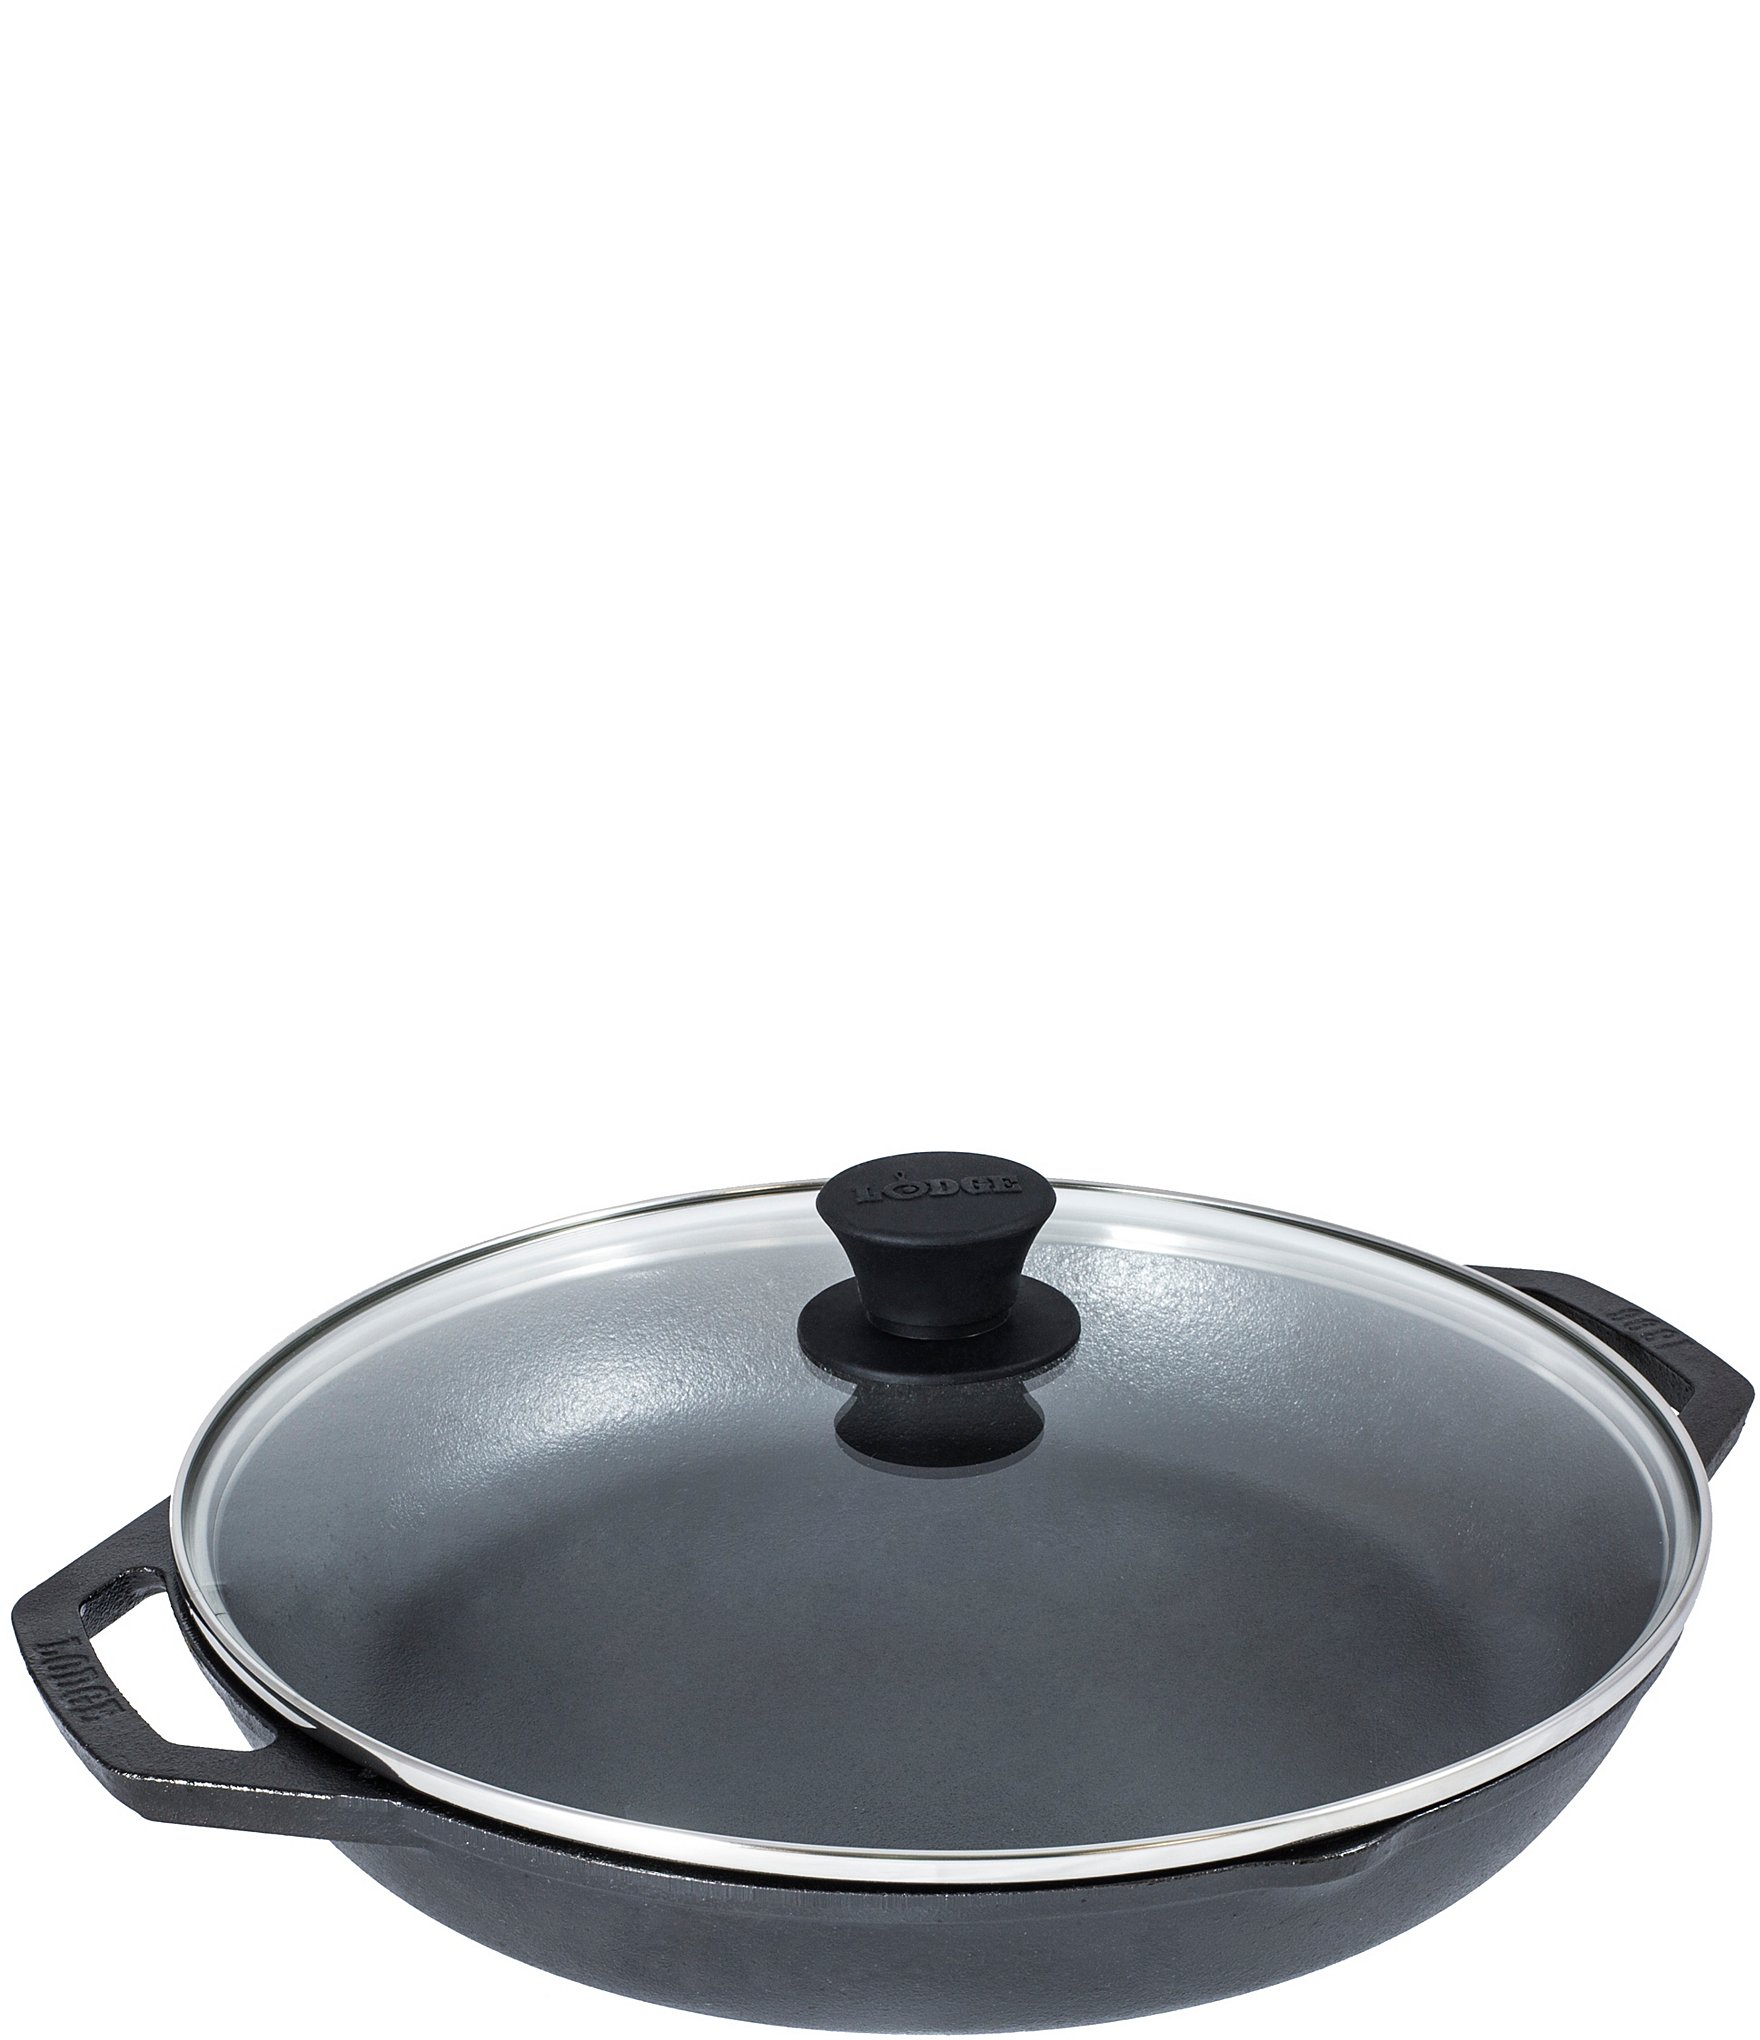 https://dimg.dillards.com/is/image/DillardsZoom/zoom/lodge-cast-iron-chef-collection-12-inch-everyday-pan/05833233_zi.jpg